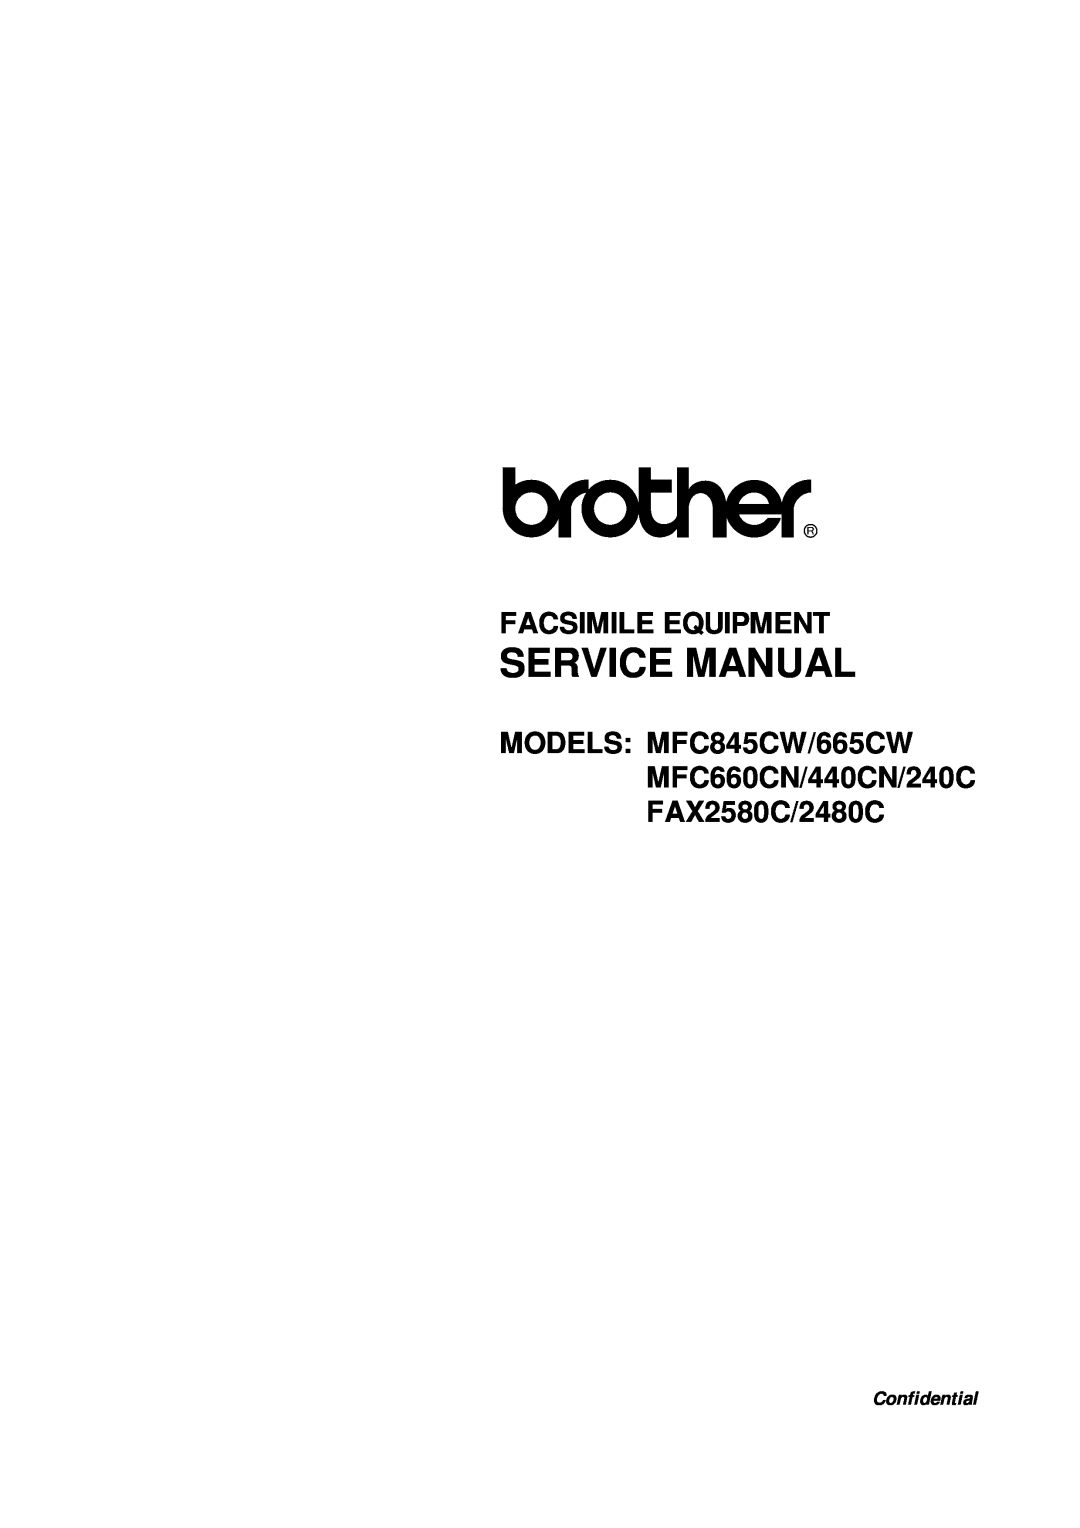 Brother MFC845CW/665CW, FAX2580C/2480C, MFC240C, MFC440CN service manual Service Manual, Facsimile Equipment, Confidential 